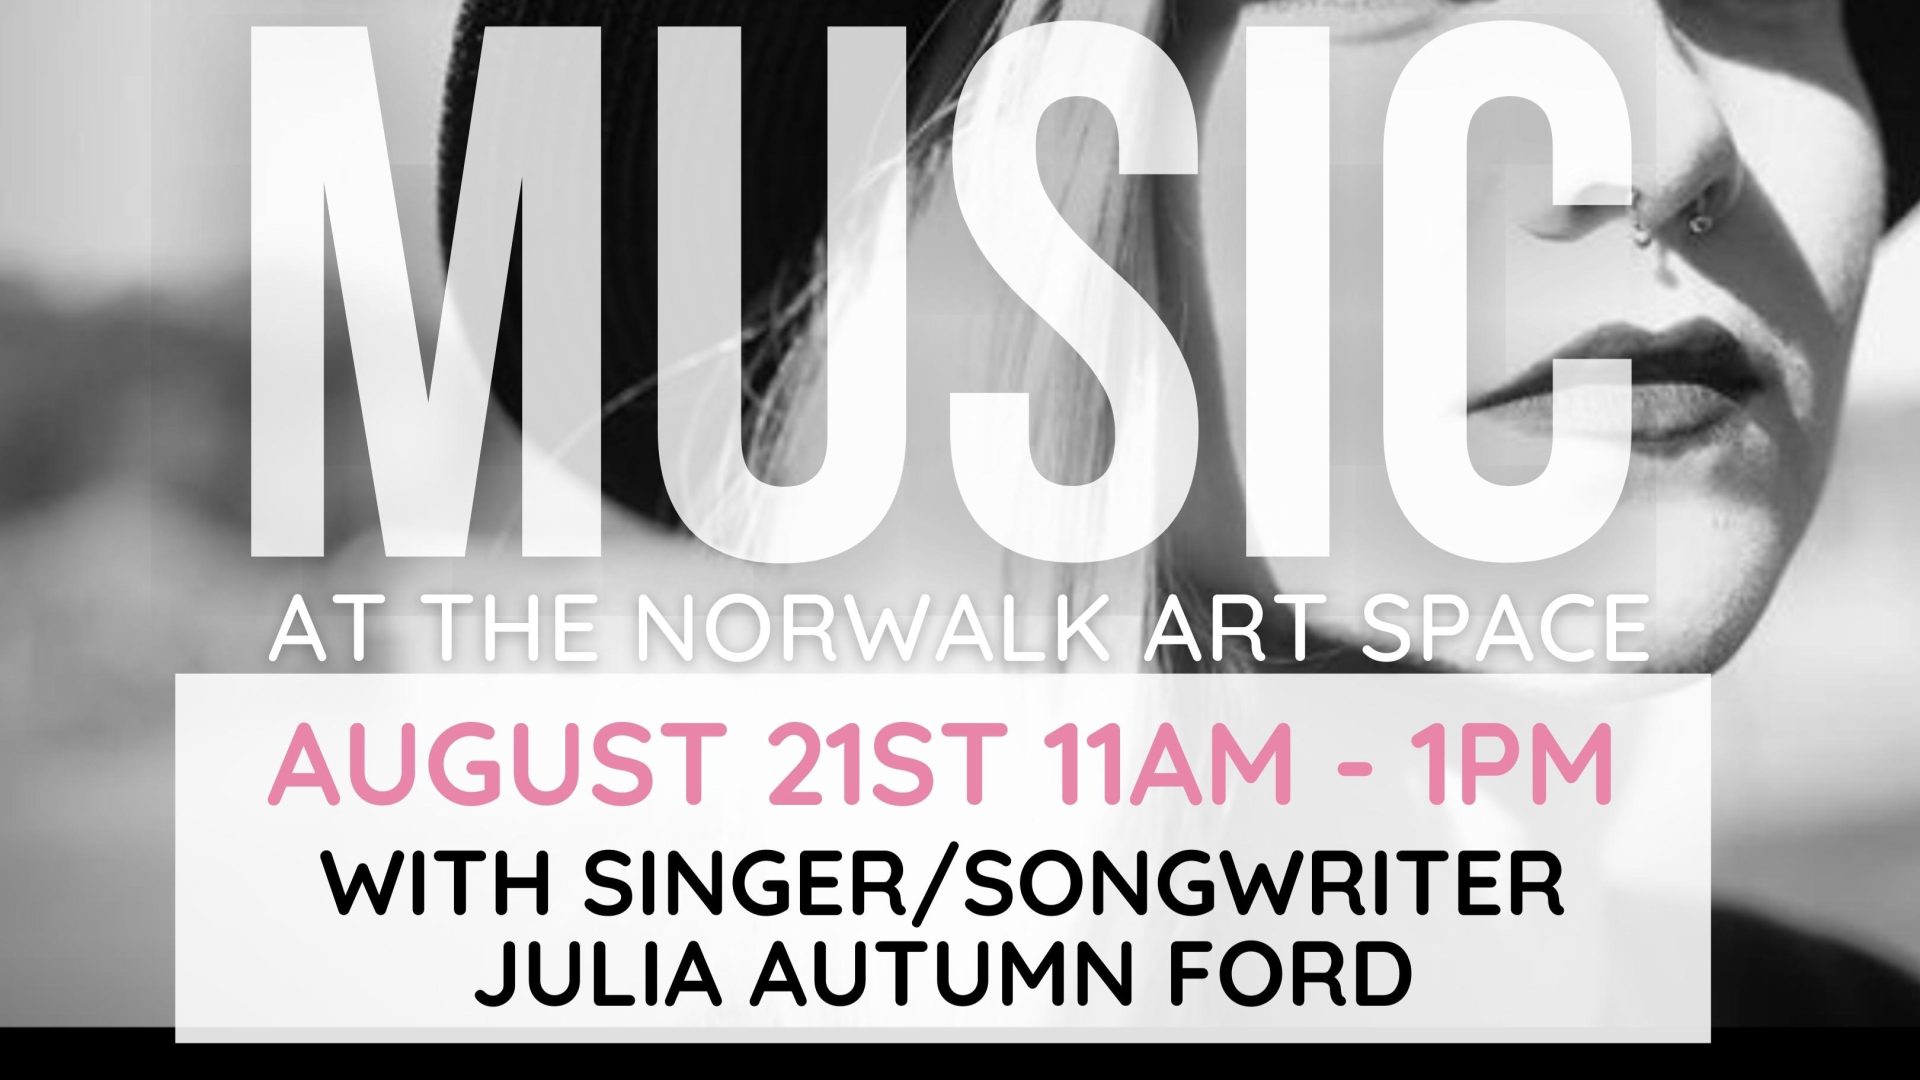 Sunday Music with singer/songwriter Julia Autumn Ford